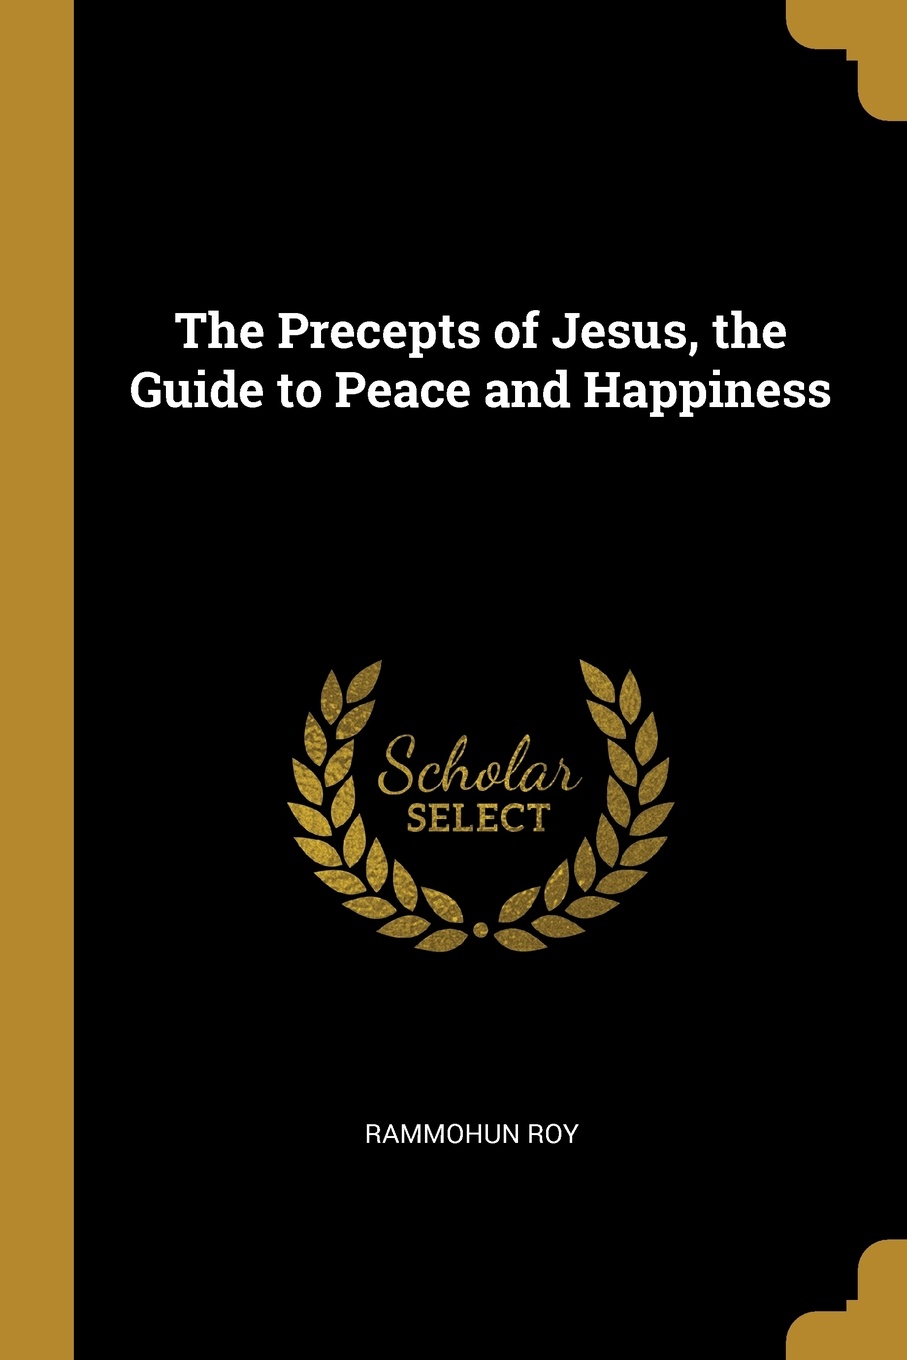 The Precepts of Jesus, the Guide to Peace and Happiness